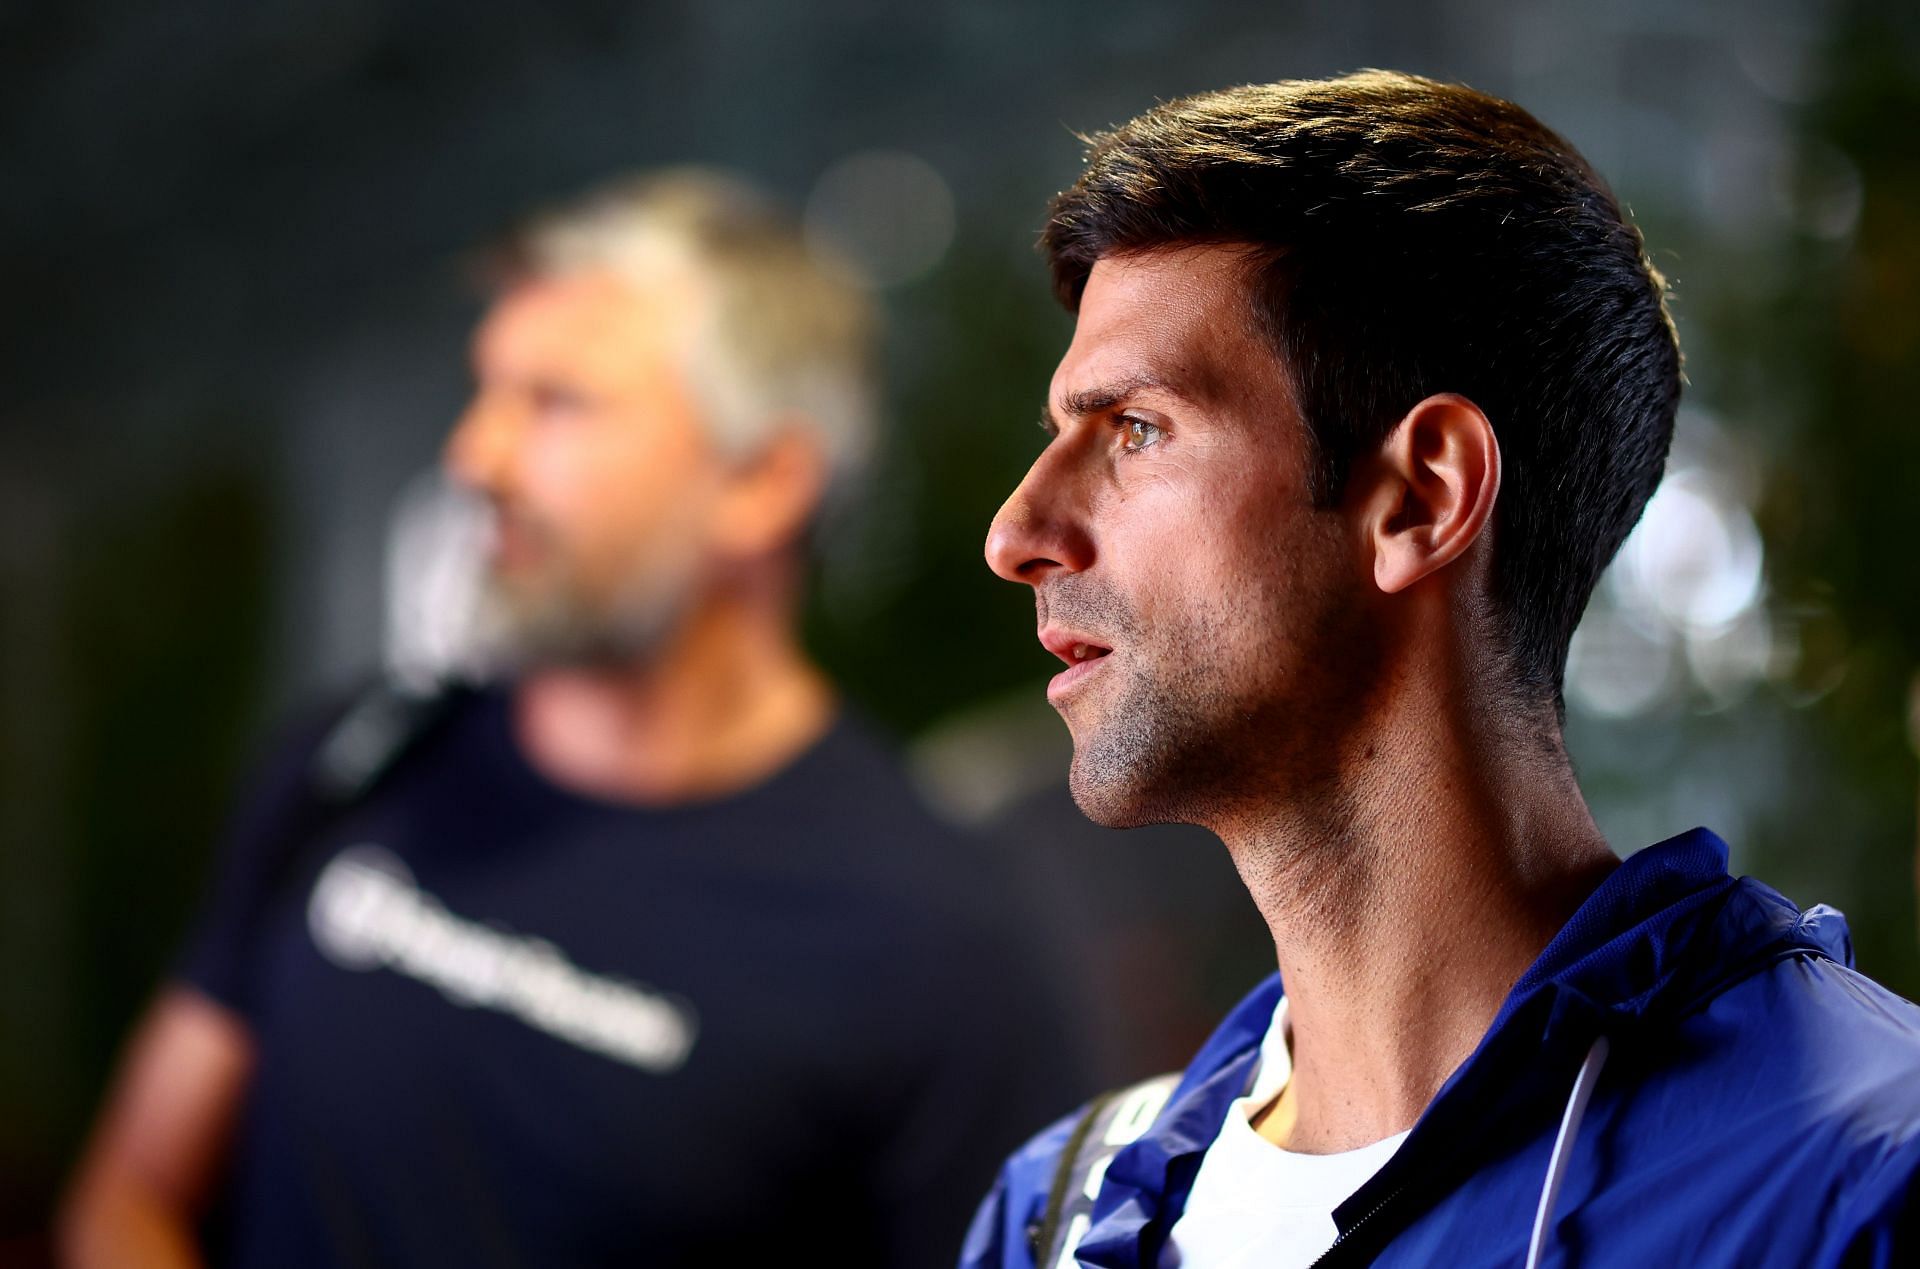 Novak Djokovic will take on Gael Monfils in the second round of the Madrid Masters